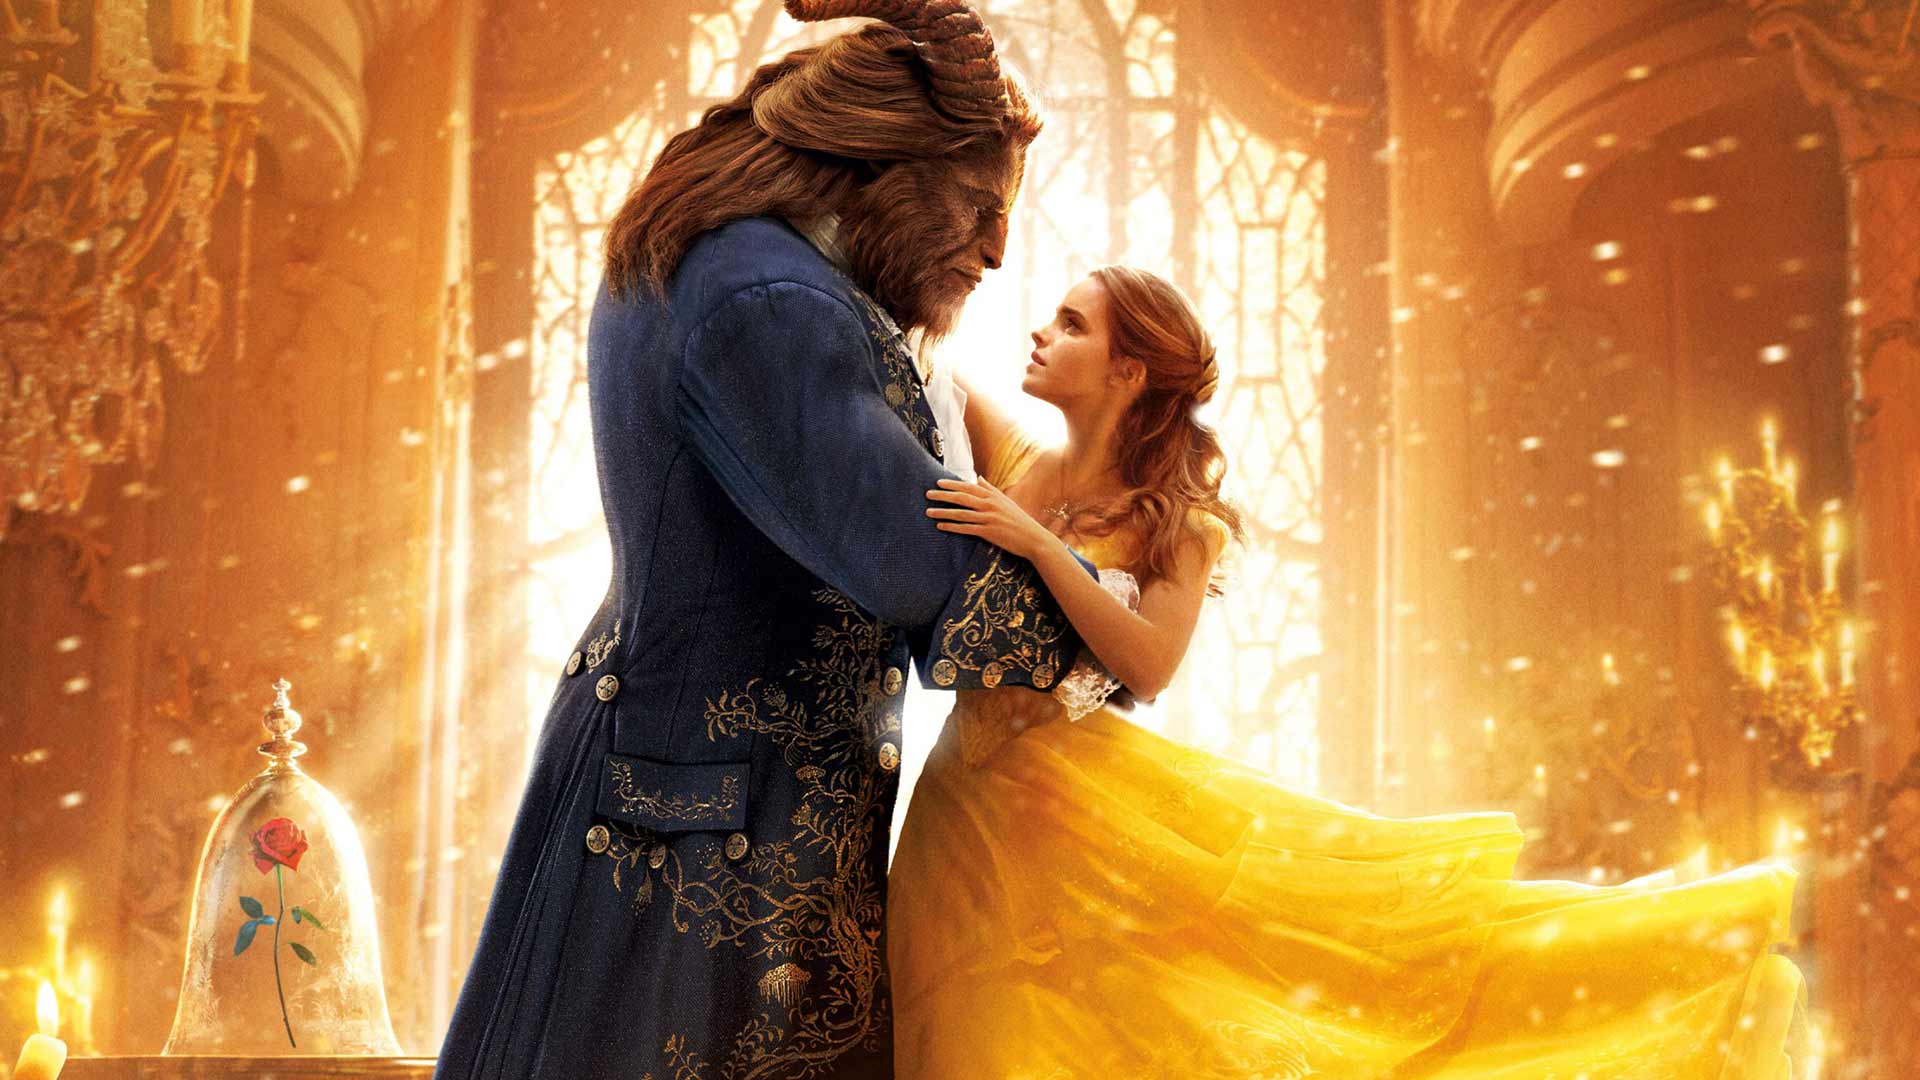 Beauty and the beast. Красавица и чудовище фильм 2017. Красавица и чудовище 2017 Постер. Красавица и чудовище Beauty and the Beast. Красавица и чудовище Дисней фильм 2017.